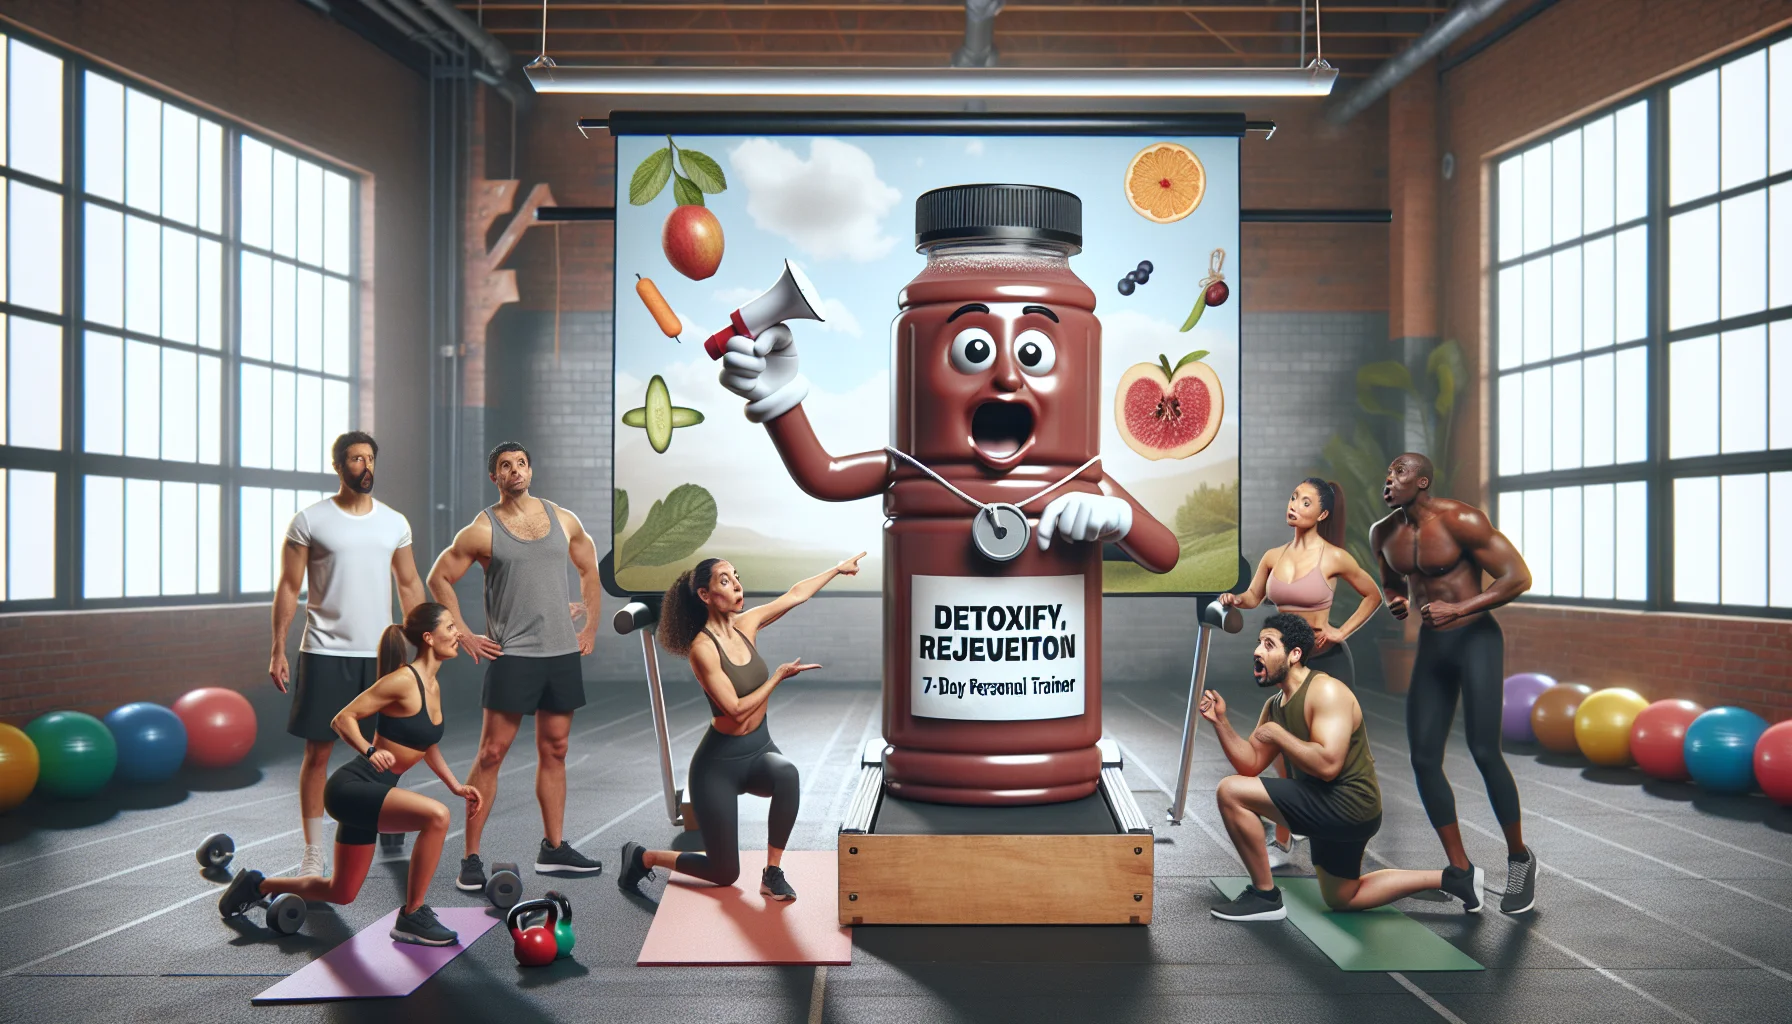 Visualize a humorous scenario highlighting Detoxify and Rejuvenate: A 7-Day Drink for Fitness Enthusiasts. Picture a gym setting where an animated bottle of the detox drink is dressed as a humorous personal trainer. With a whistle around its neck and a clipboard in hand, the bottle trainer motivates a diverse group of fitness enthusiasts. The fitness enthusiasts consist of a Caucasian male weight lifter, a Middle-Eastern female practicing yoga, a South Asian man on the treadmill, and a Black woman performing a kettlebell workout. Each individual showcases a surprised and intrigued facial expression with the detox drink displaying an encouraging demeanor.